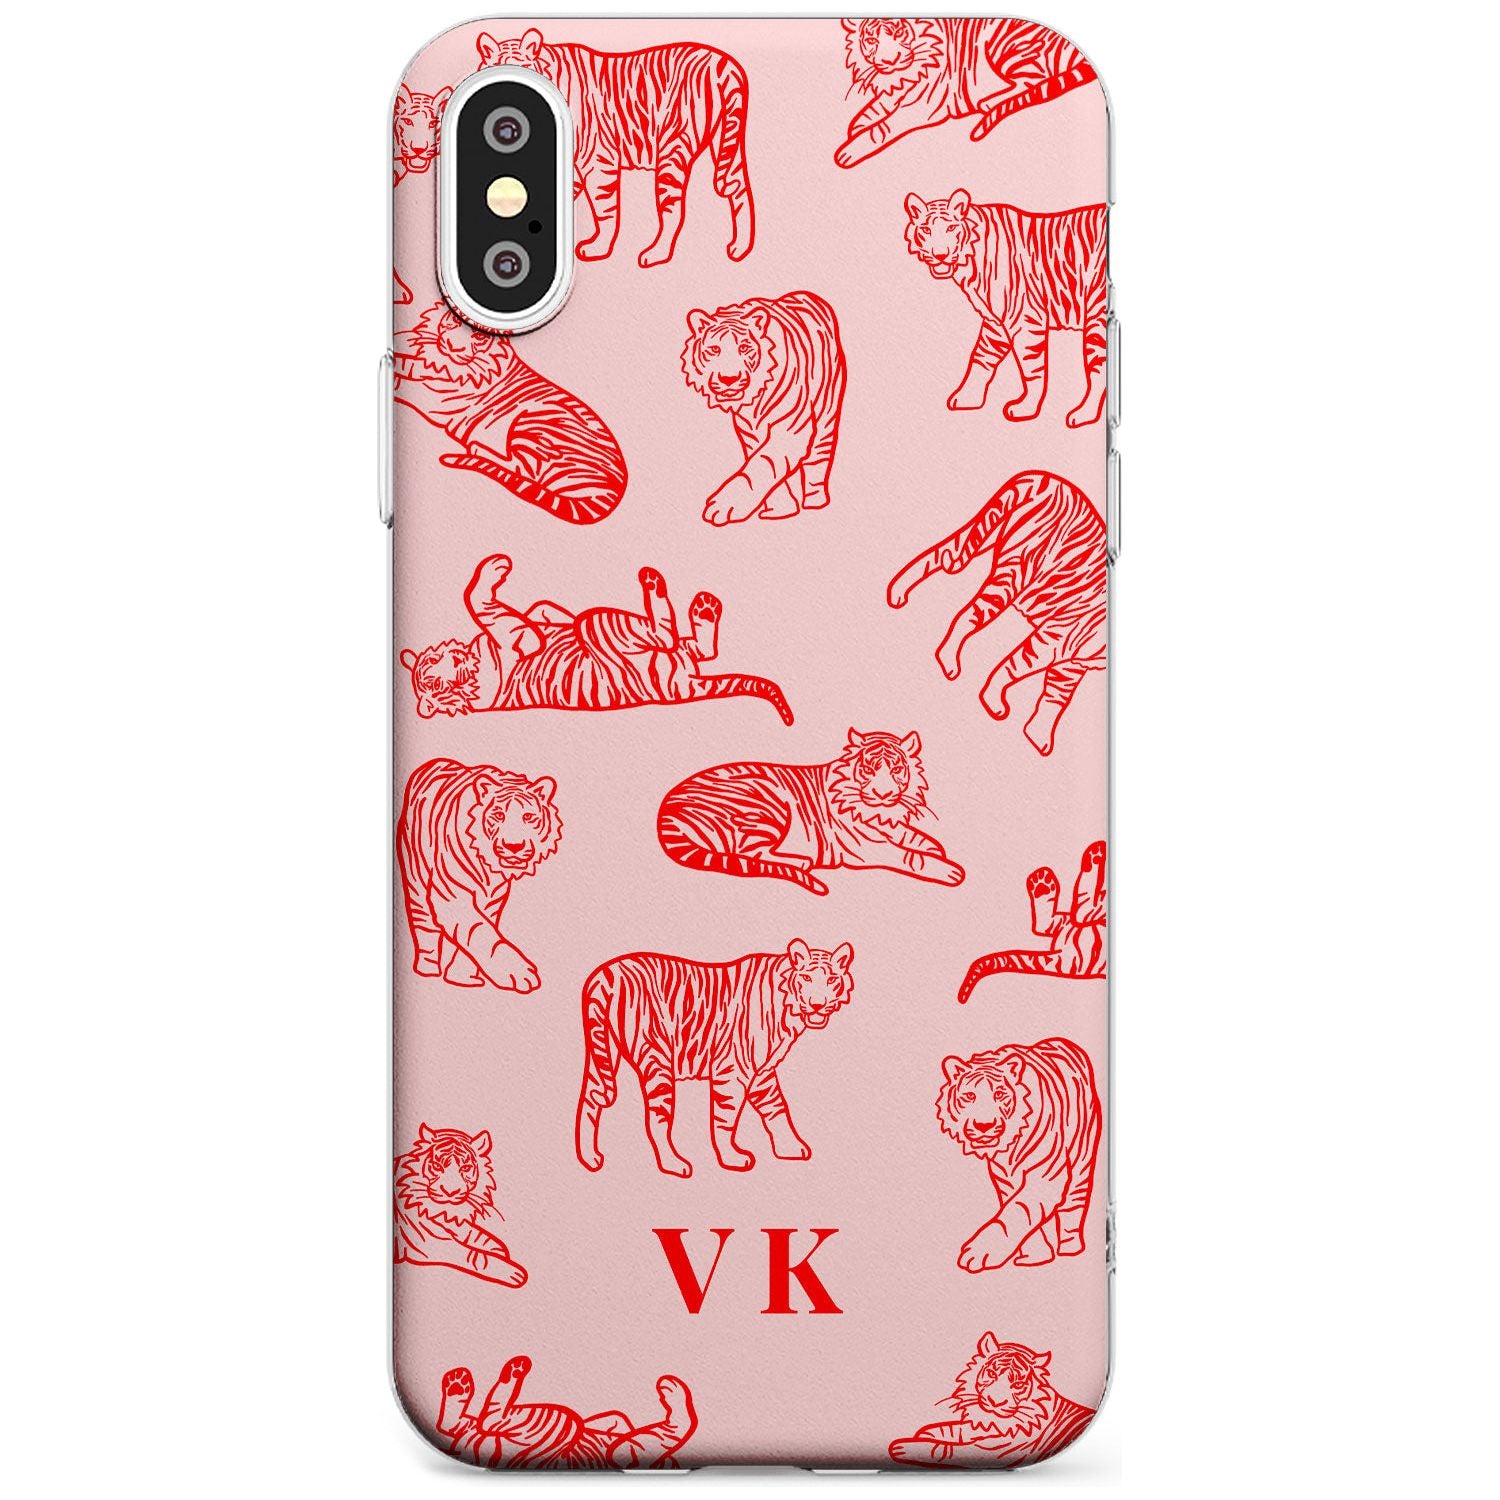 Red Tiger Outlines on Pink iPhone Case  Slim Case Custom Phone Case - Case Warehouse